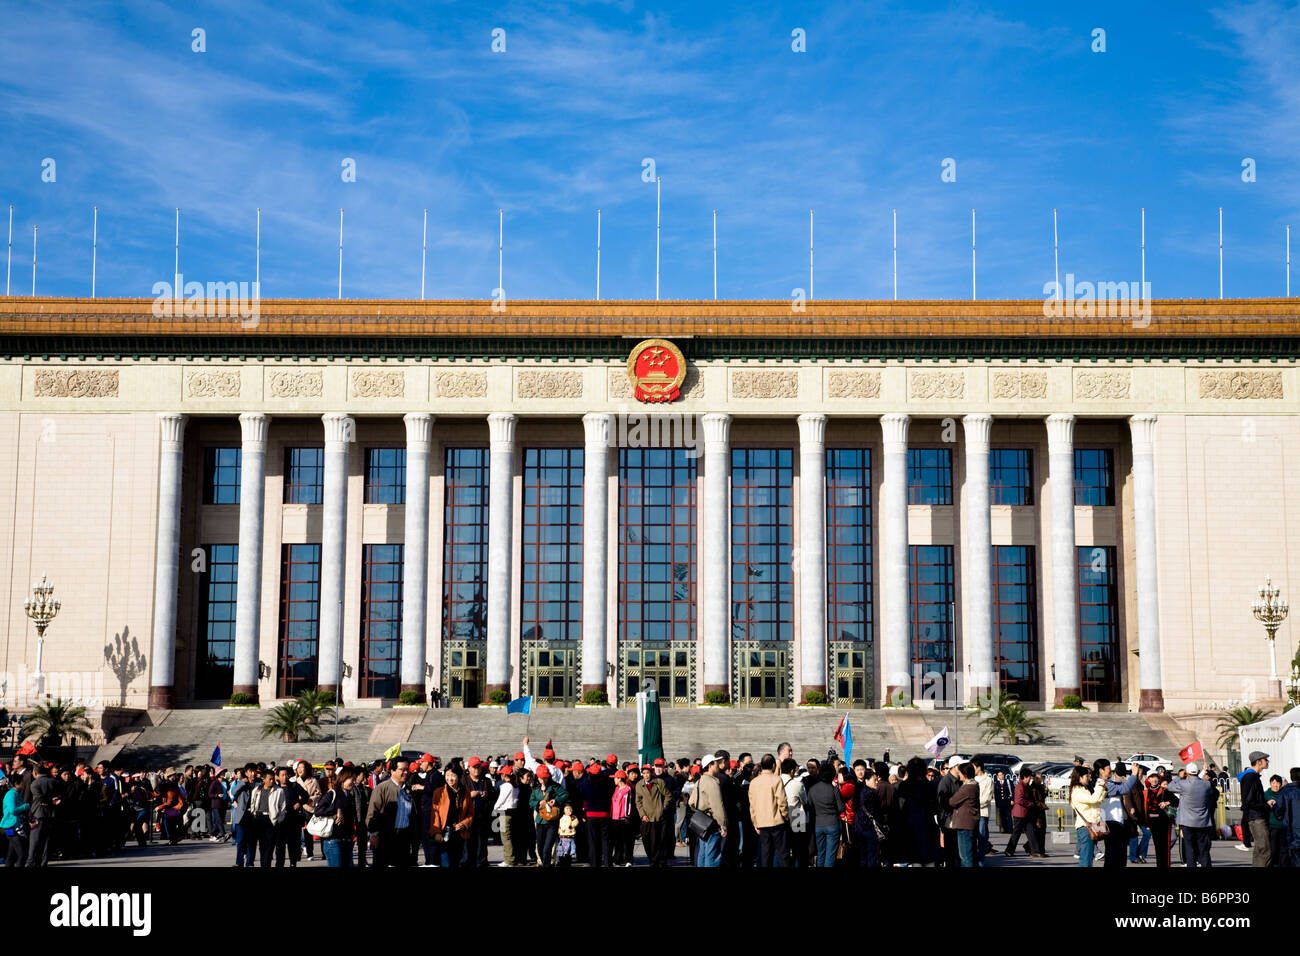 Great Hall of The People Tiananmen square Beijing China Stock Photo